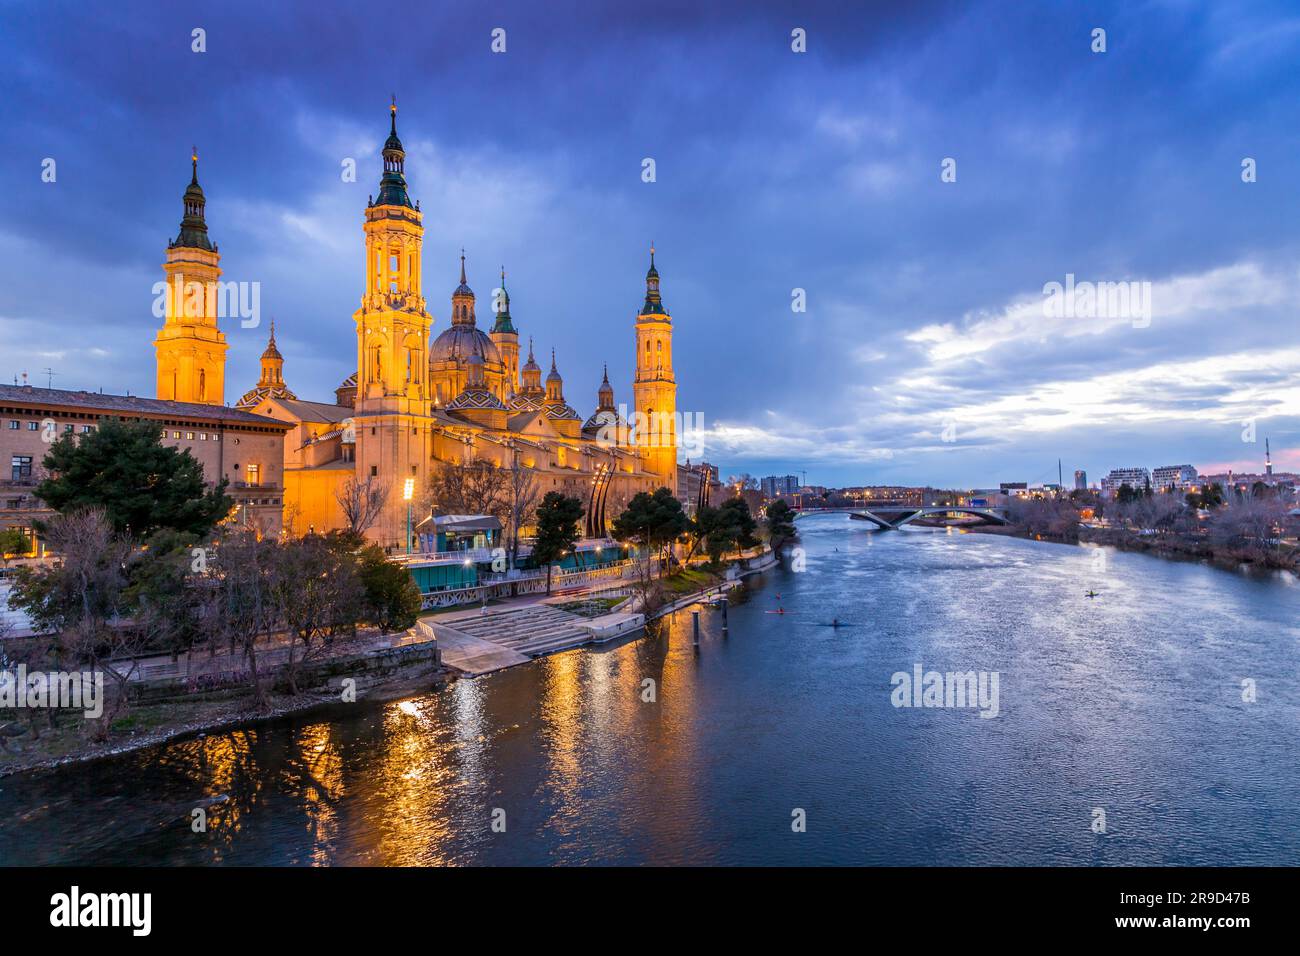 Zaragoza, Spain - February 14, 2022: The Cathedral-Basilica of Our Lady of the Pillar is a Roman Catholic church by the River Ebro in Zaragoza, Aragon Stock Photo